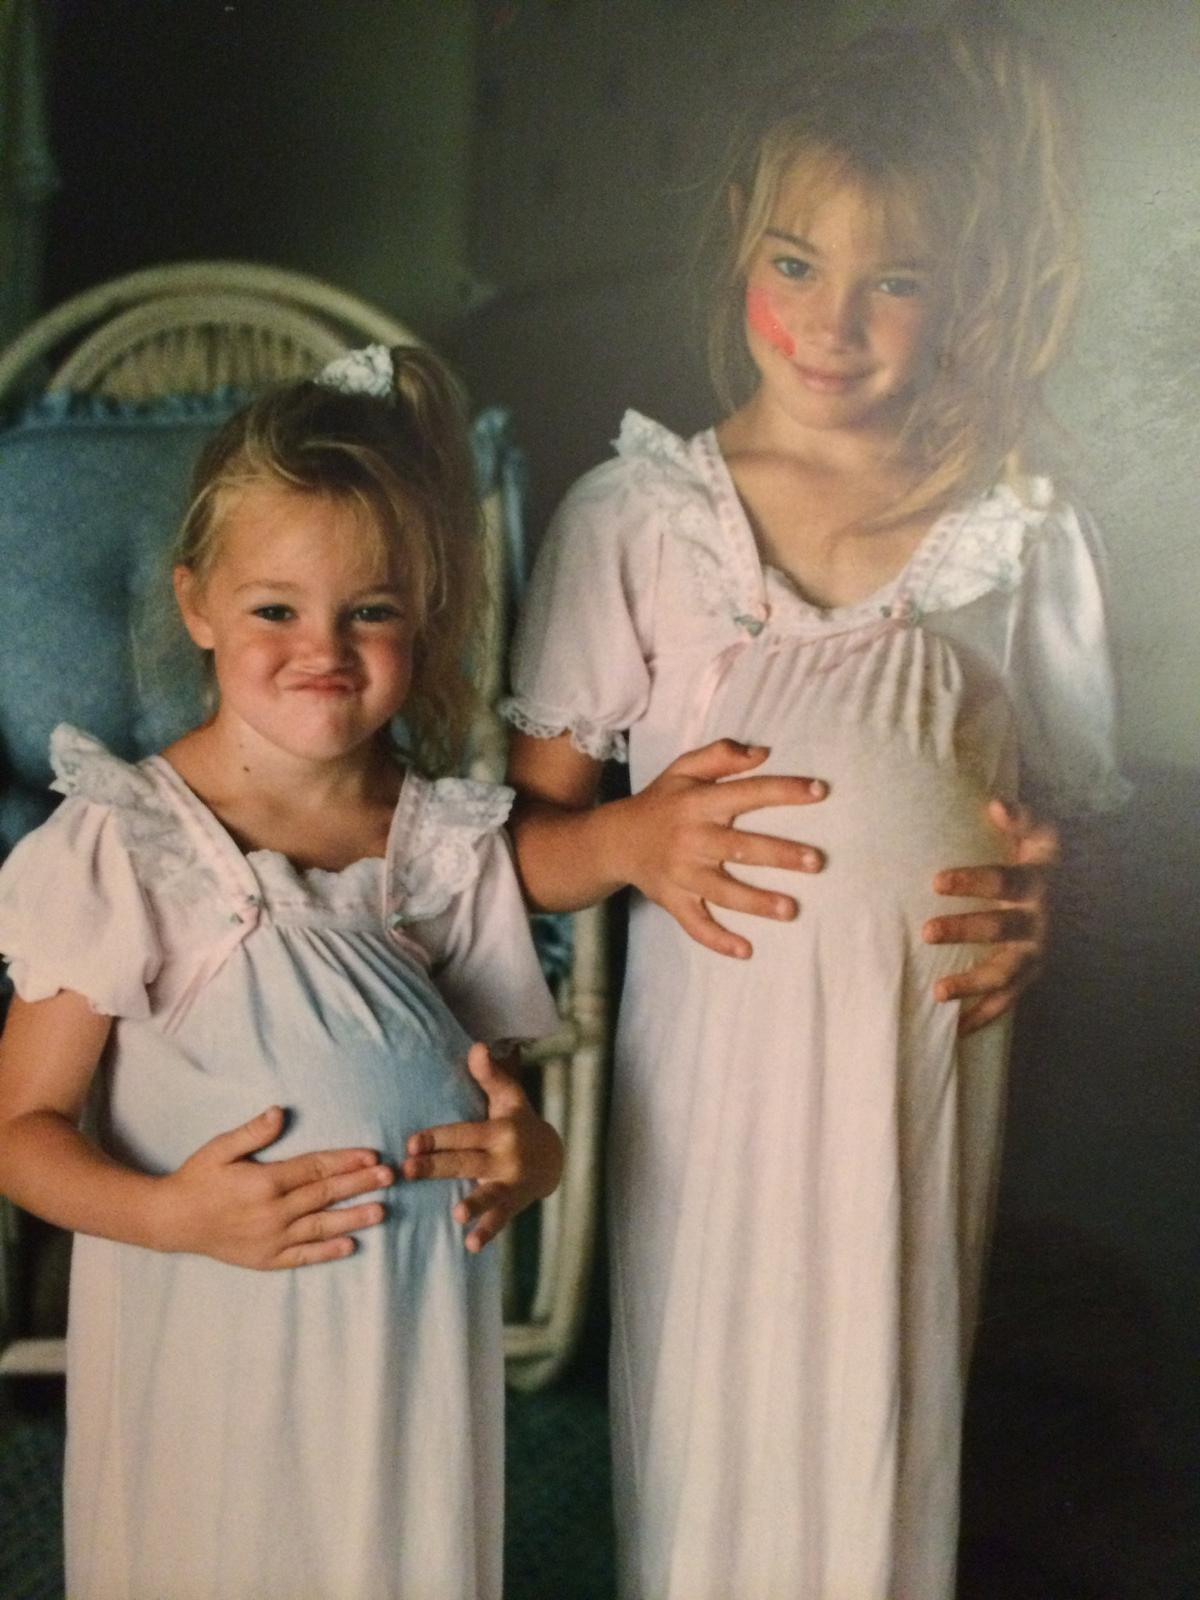 Bri Dietz and her sister, Chaulet Barba, when they were younger. (SWNS)